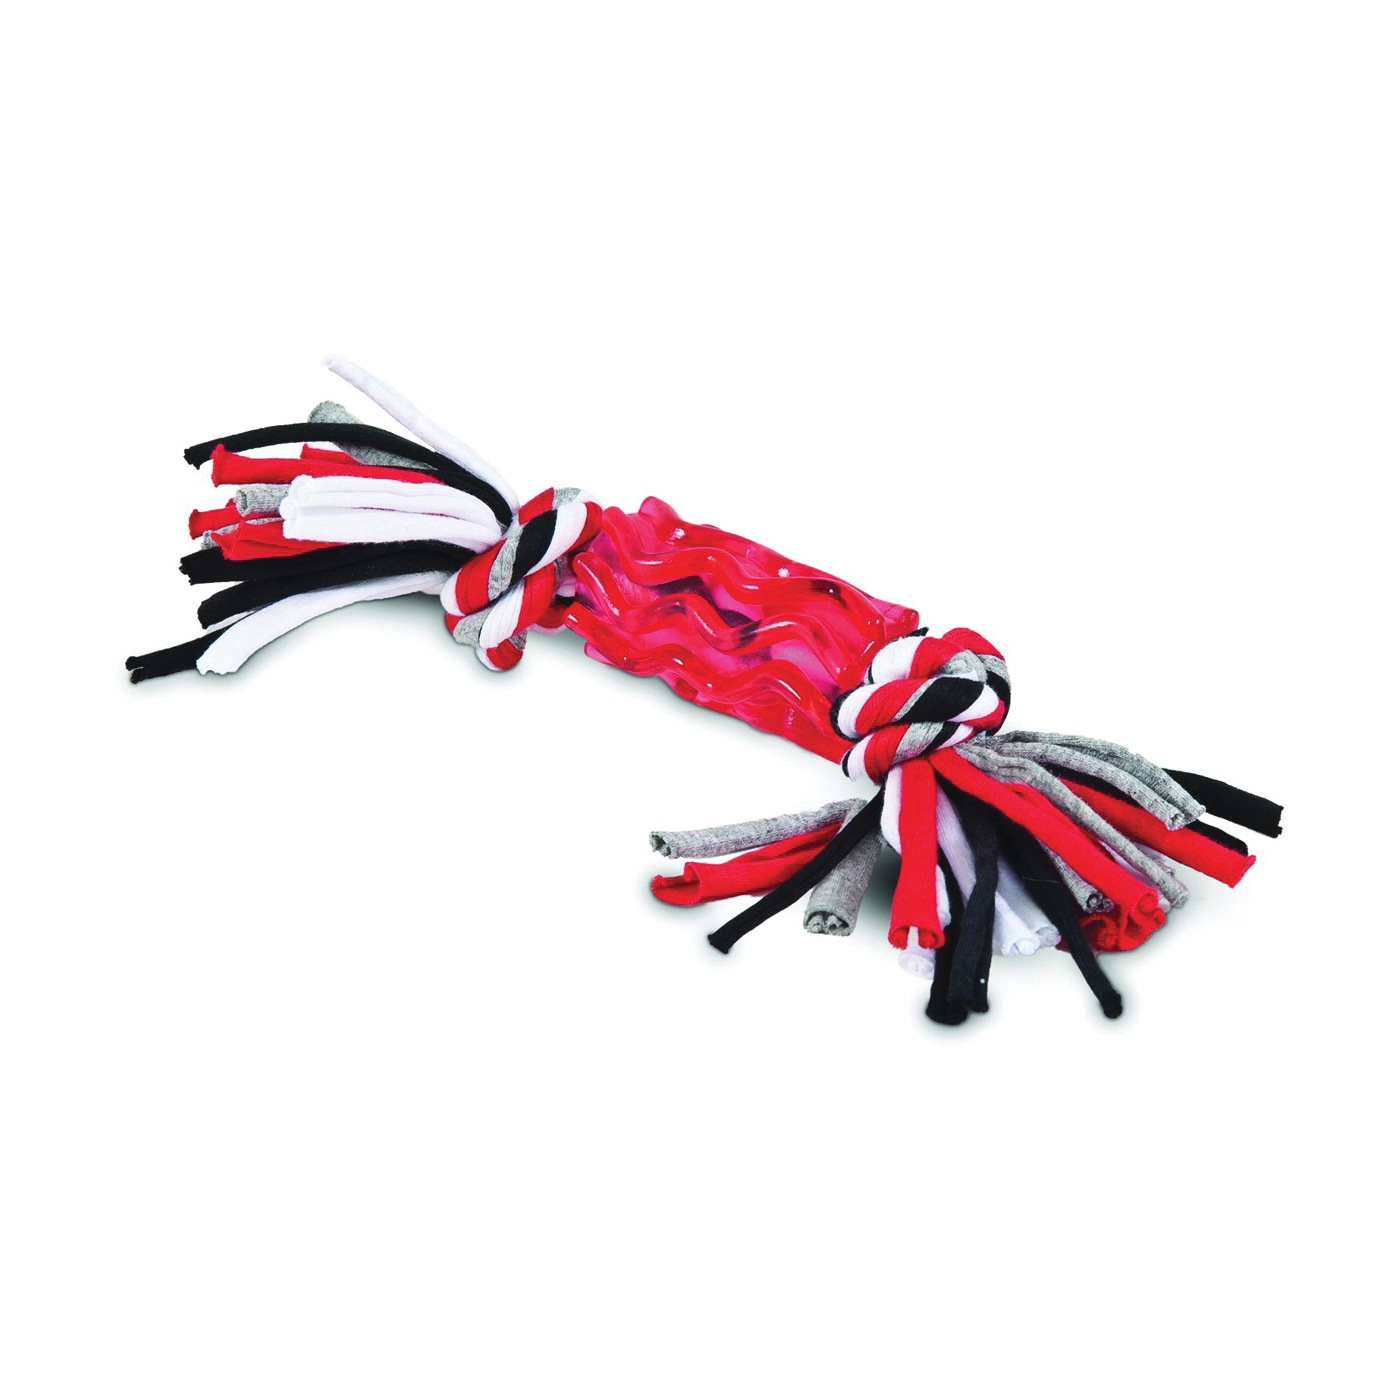 30890 Dog Toy, S, Snarl Toy, Black/Red